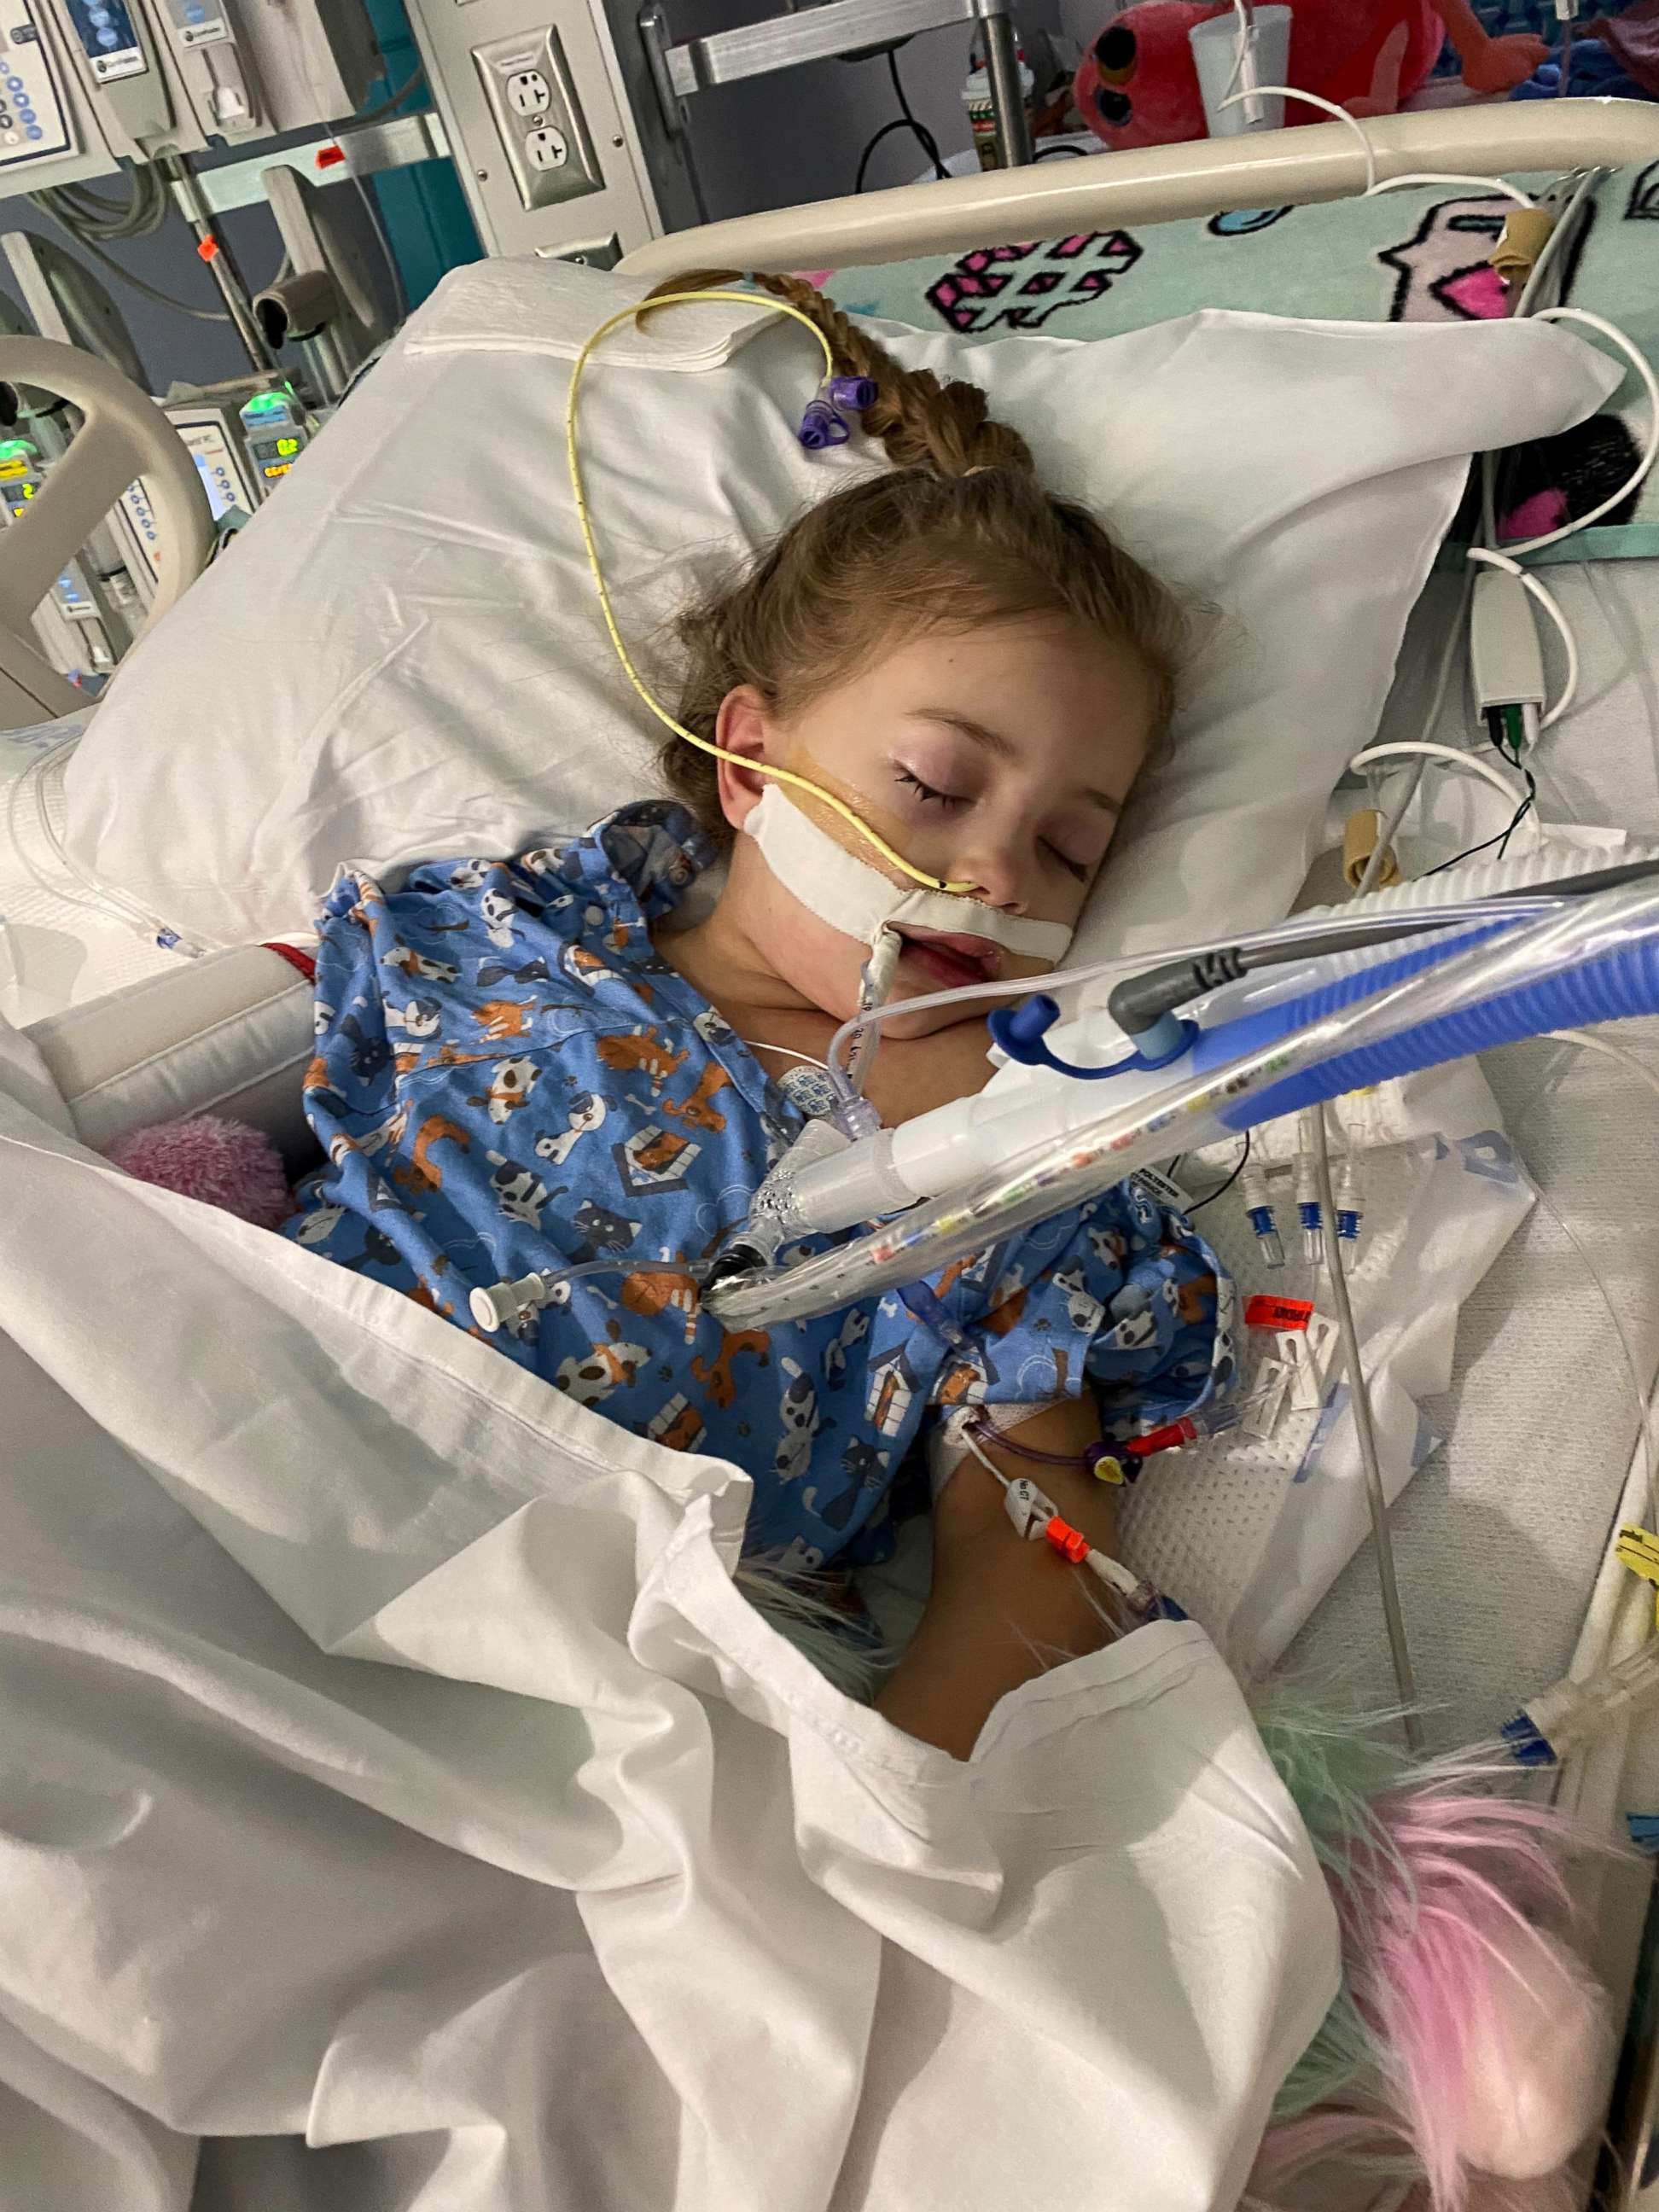 PHOTO: Peyton Copeland, 5, was hospitalized with Multisystem Inflammatory Syndrome in Children (MIS-C), a rare post-COVID illness.